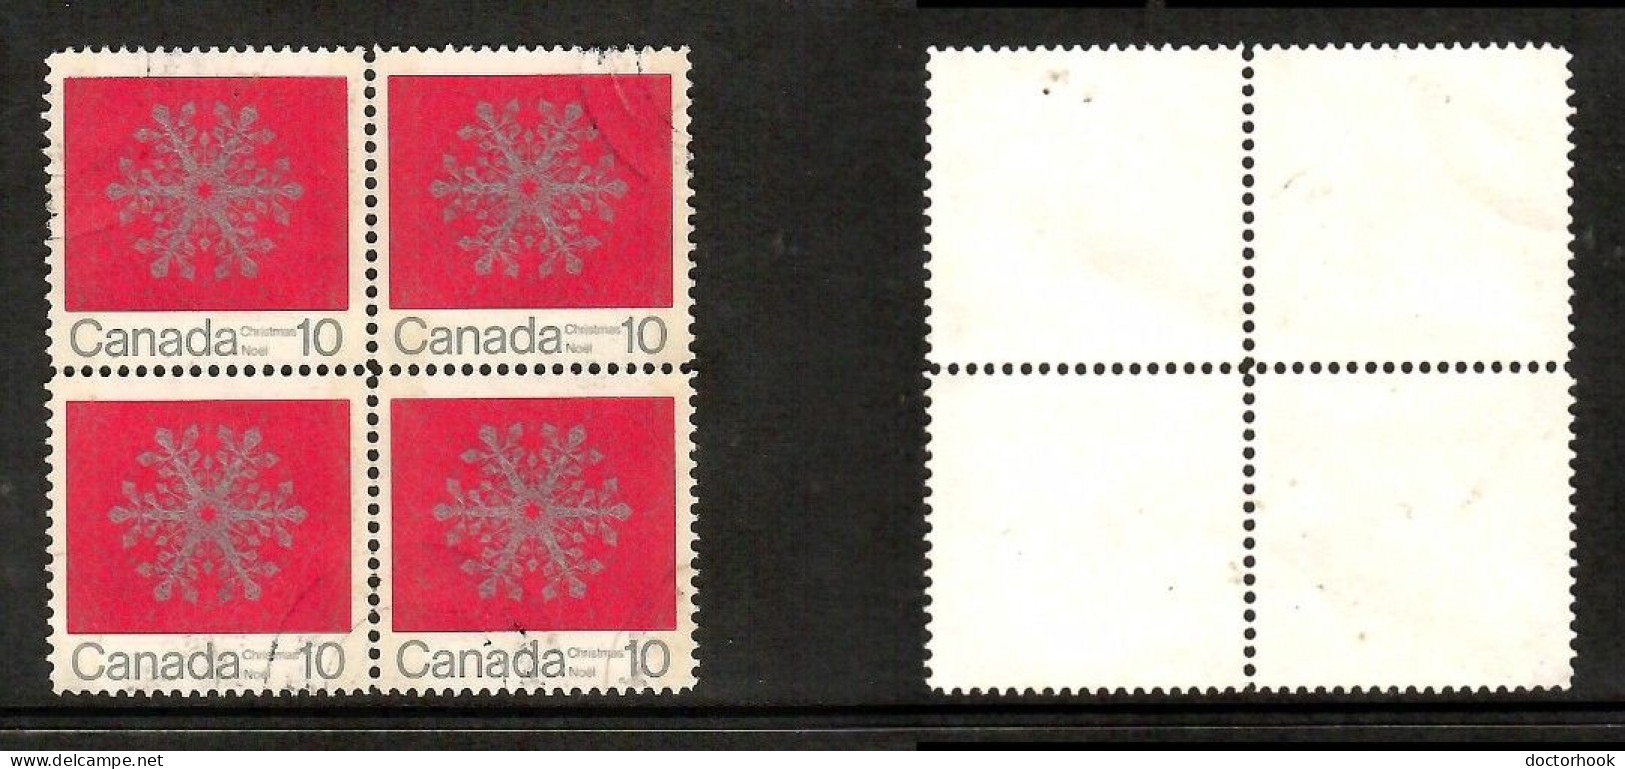 CANADA   Scott # 556 USED BLOCK Of 4 (CONDITION AS PER SCAN) (CAN-220) - Blocks & Sheetlets